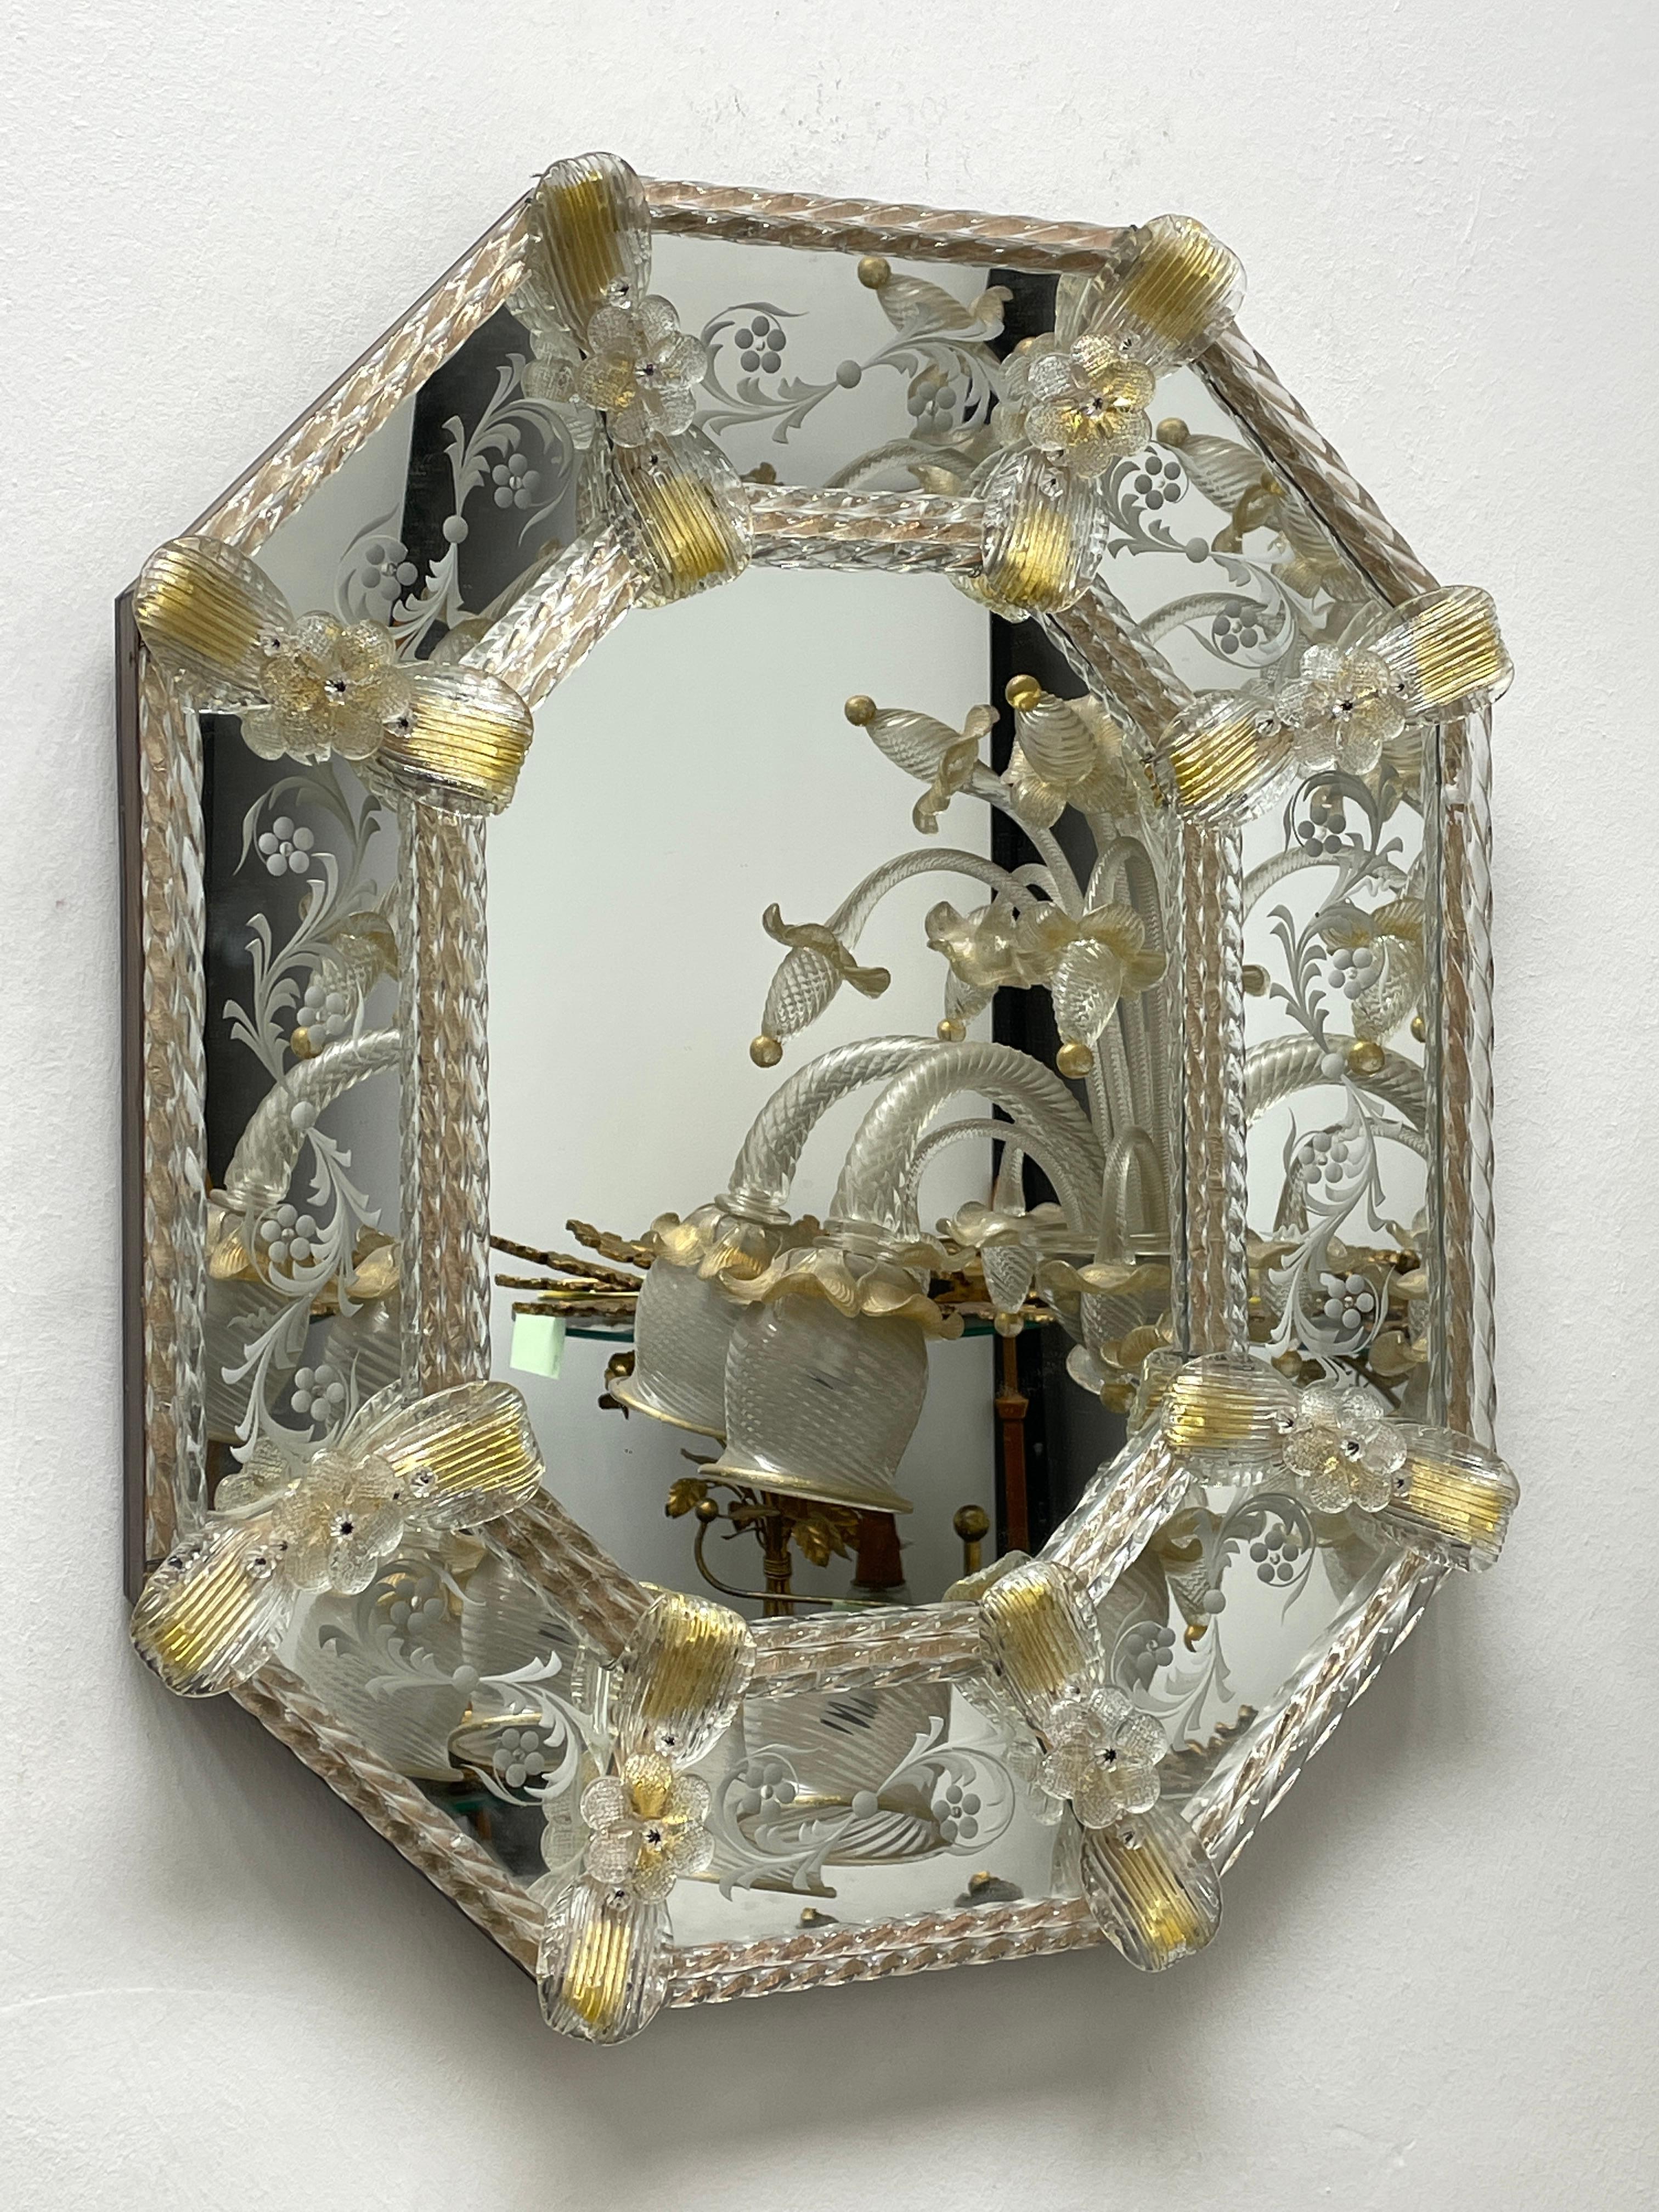 A stunning beautiful Murano glass mirror surrounded with handmade gold flake glass flowers. Age circa 1960s. With signs of wear as expected with age and use. Obviously this item is not new, so please check all photos before purchase. A nice addition